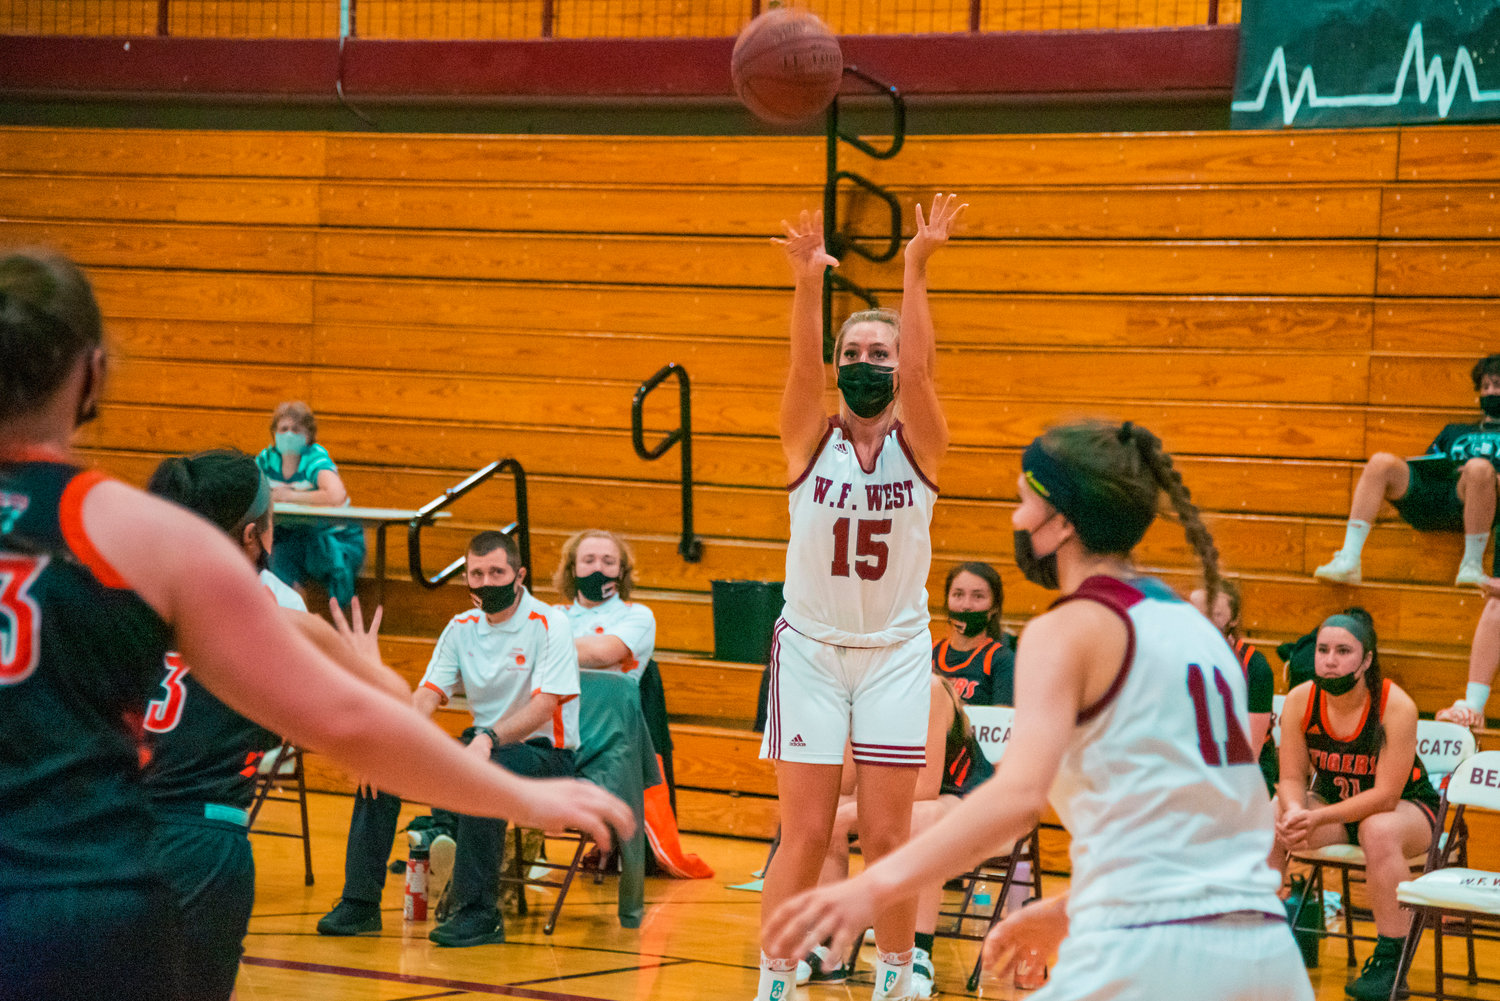 FILE PHOTO - W.F. West’s Madi Mencke (15) makes a deep shot during a game against the Tigers played Monday night in Chehalis.